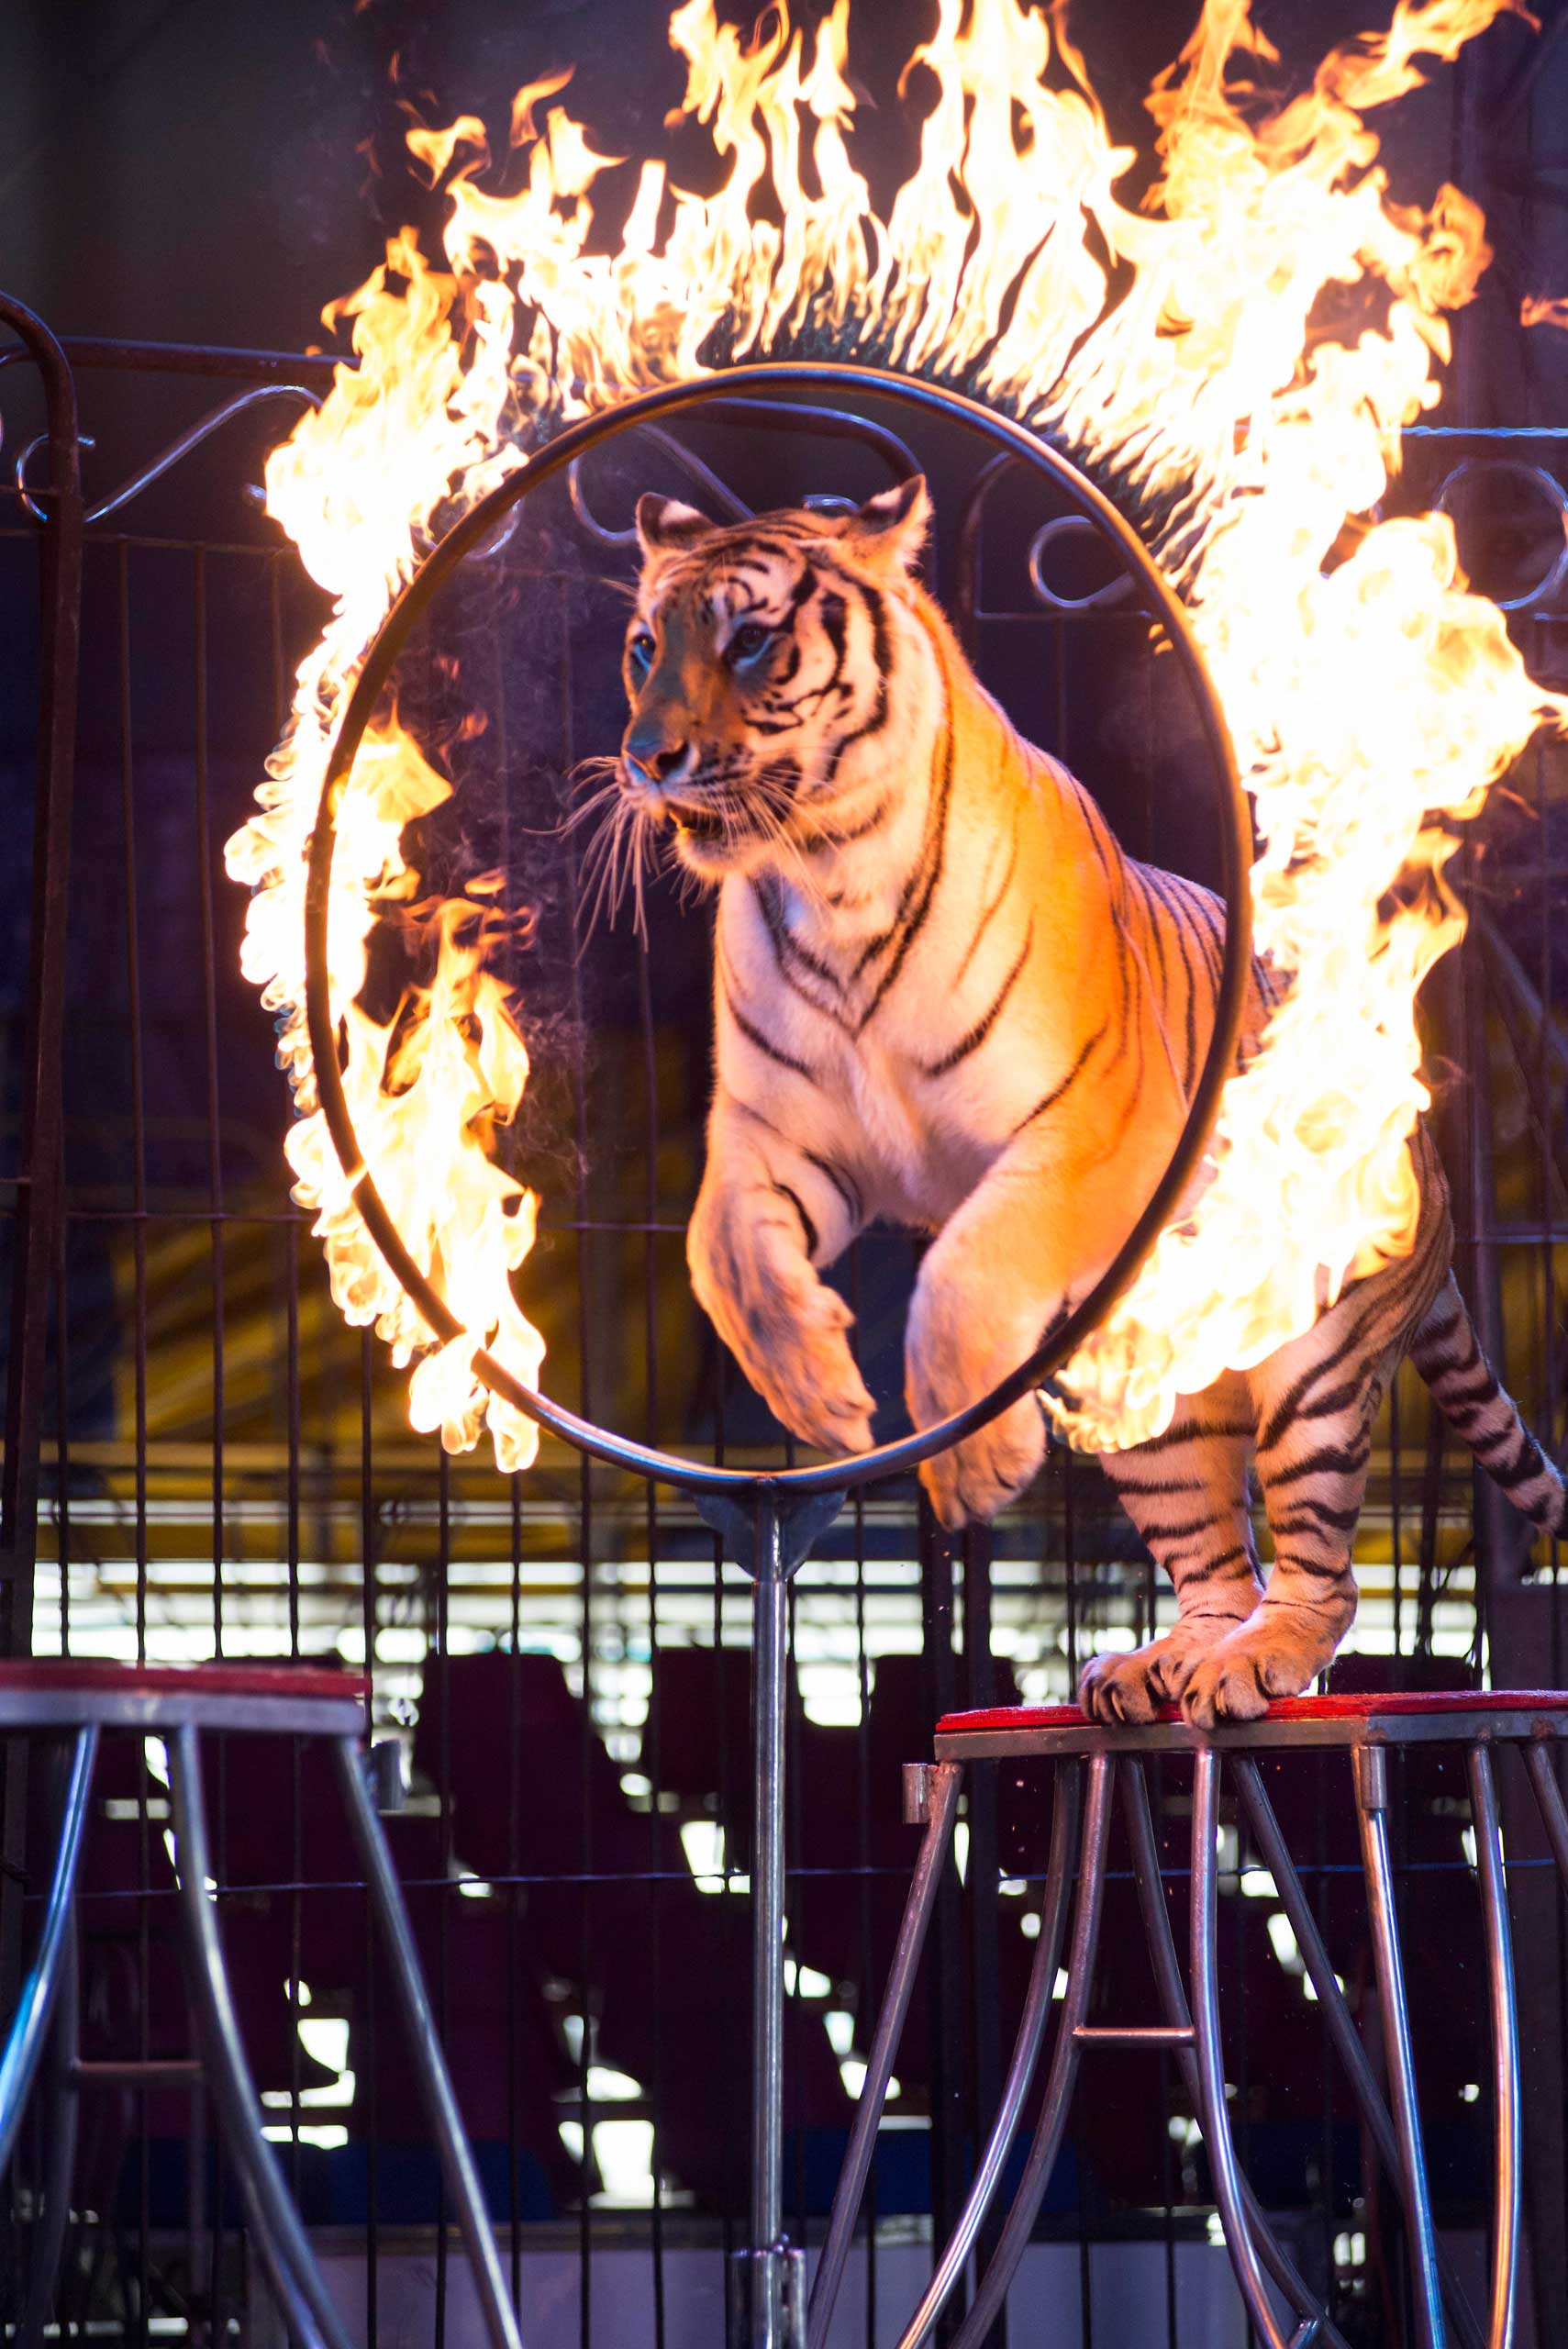 A tiger jumps through a ring of fire during a performance of the Fuentes Gasca Brothers Circus in Mexico City, June 22, 2014. (Sean Havey—AP)